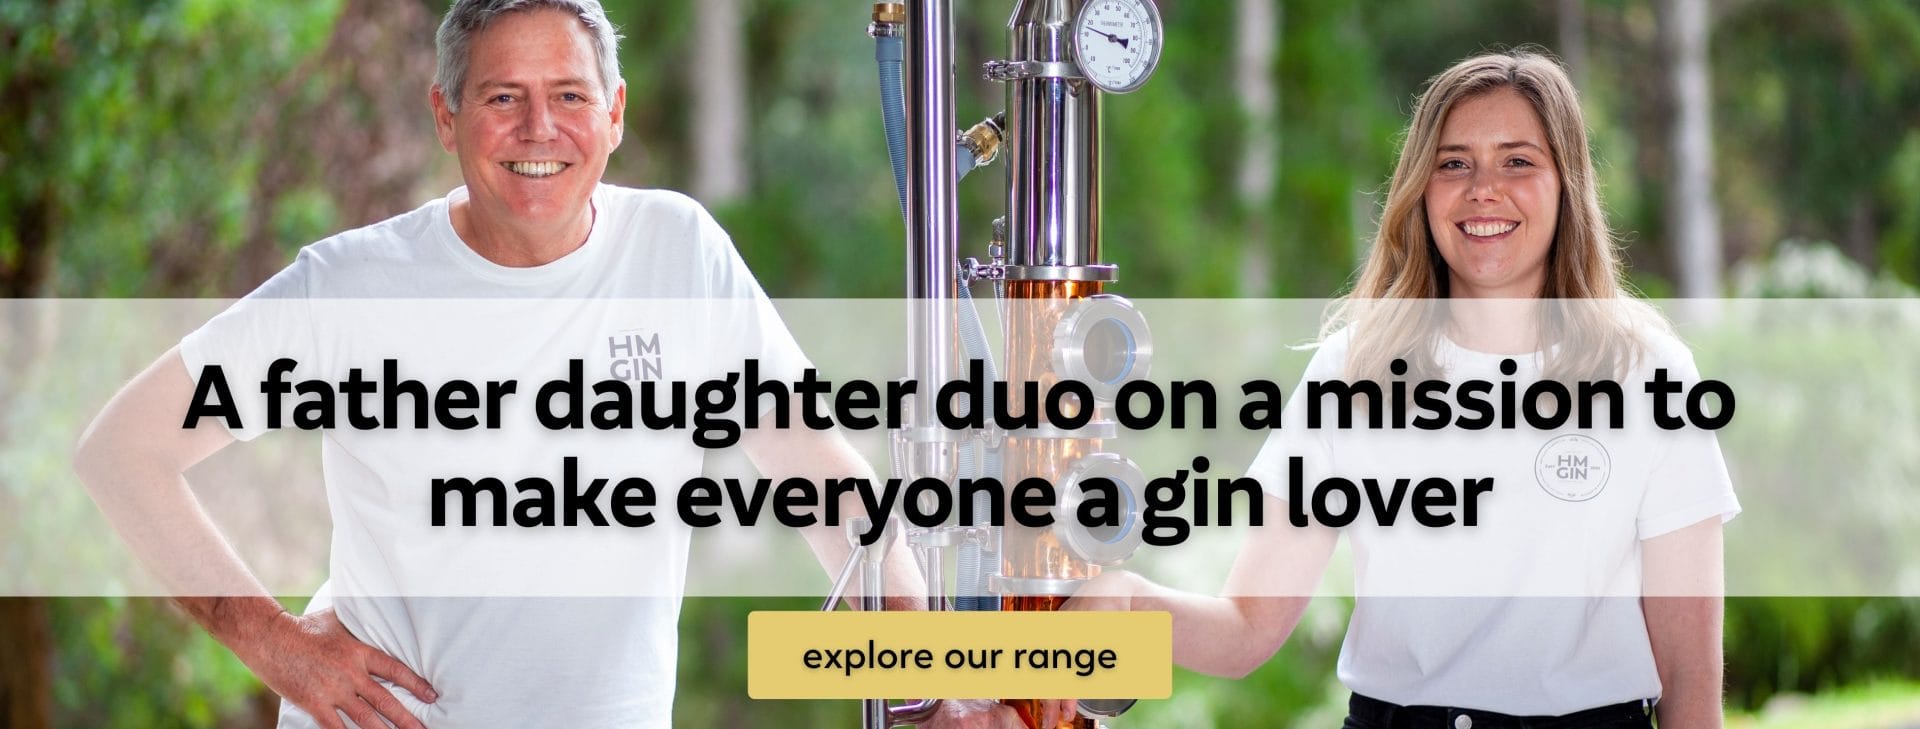 A father daughter duo on a mission to make everyone a gin lover